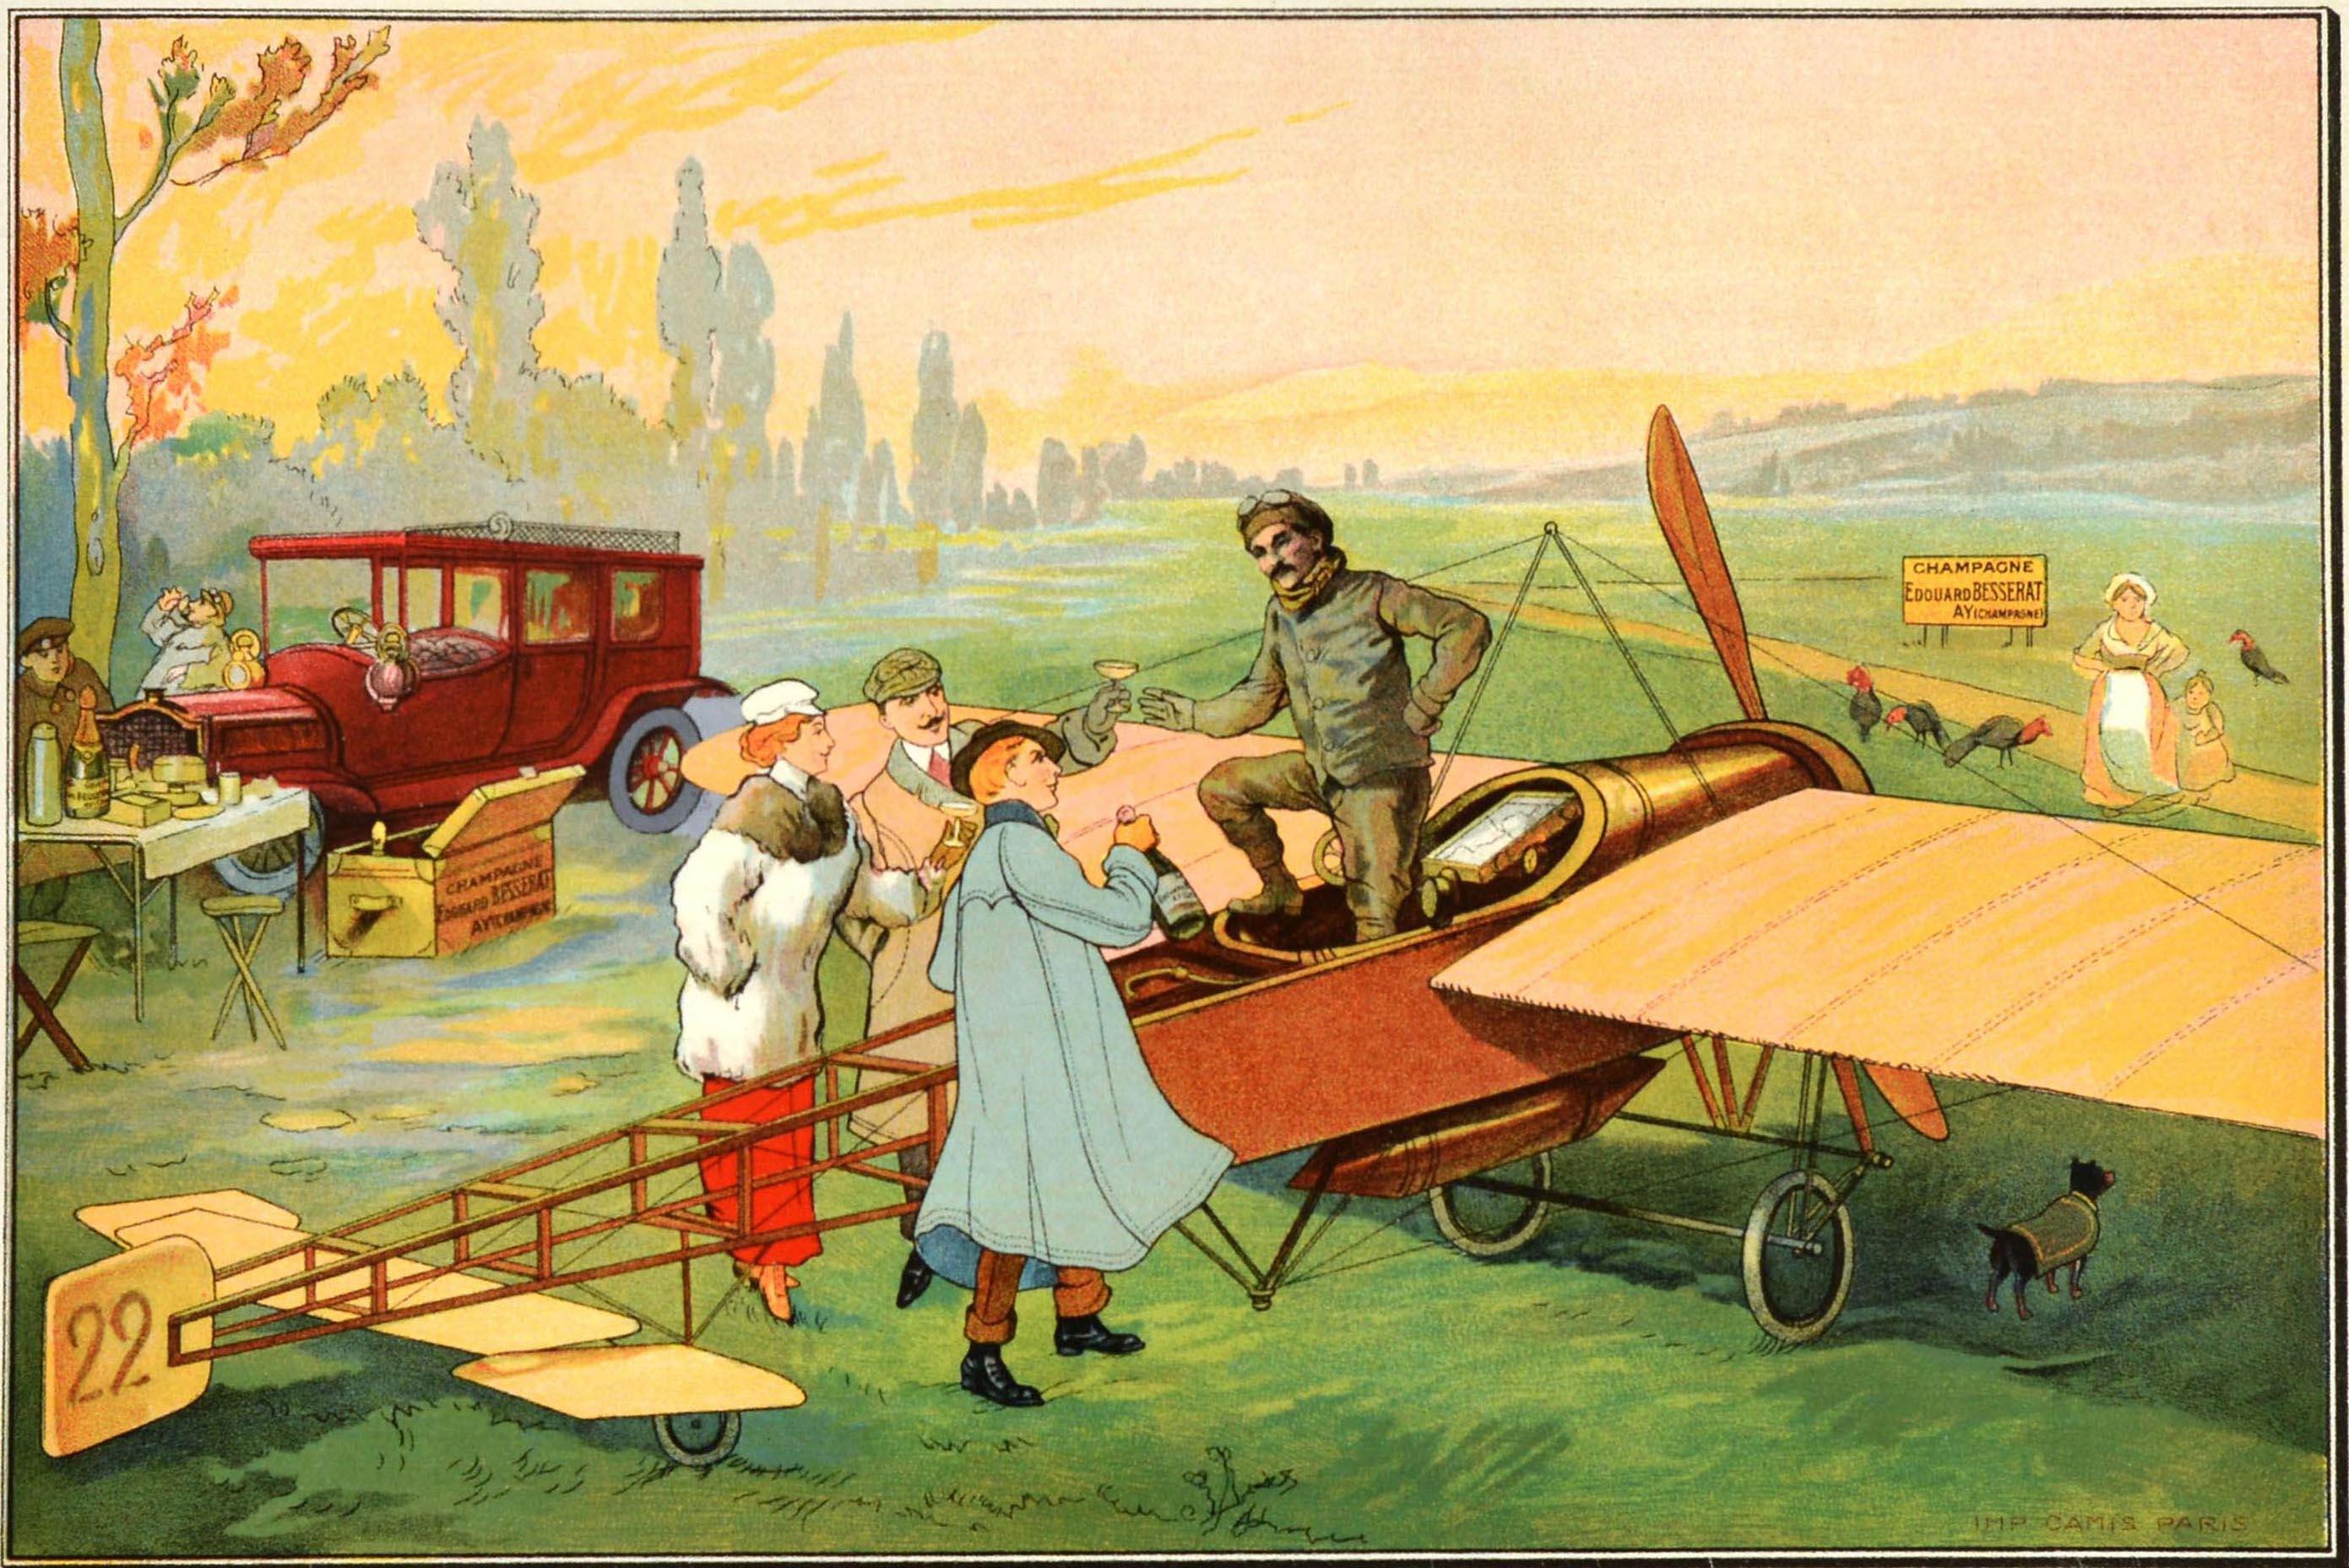 Original antique drink advertising poster for Champagne Edouard Besserat la bonne marque Ay (Champagne), featuring an illustration of an early monoplane showing the pilot enjoying a glass of champagne with a group of people in the countryside, a